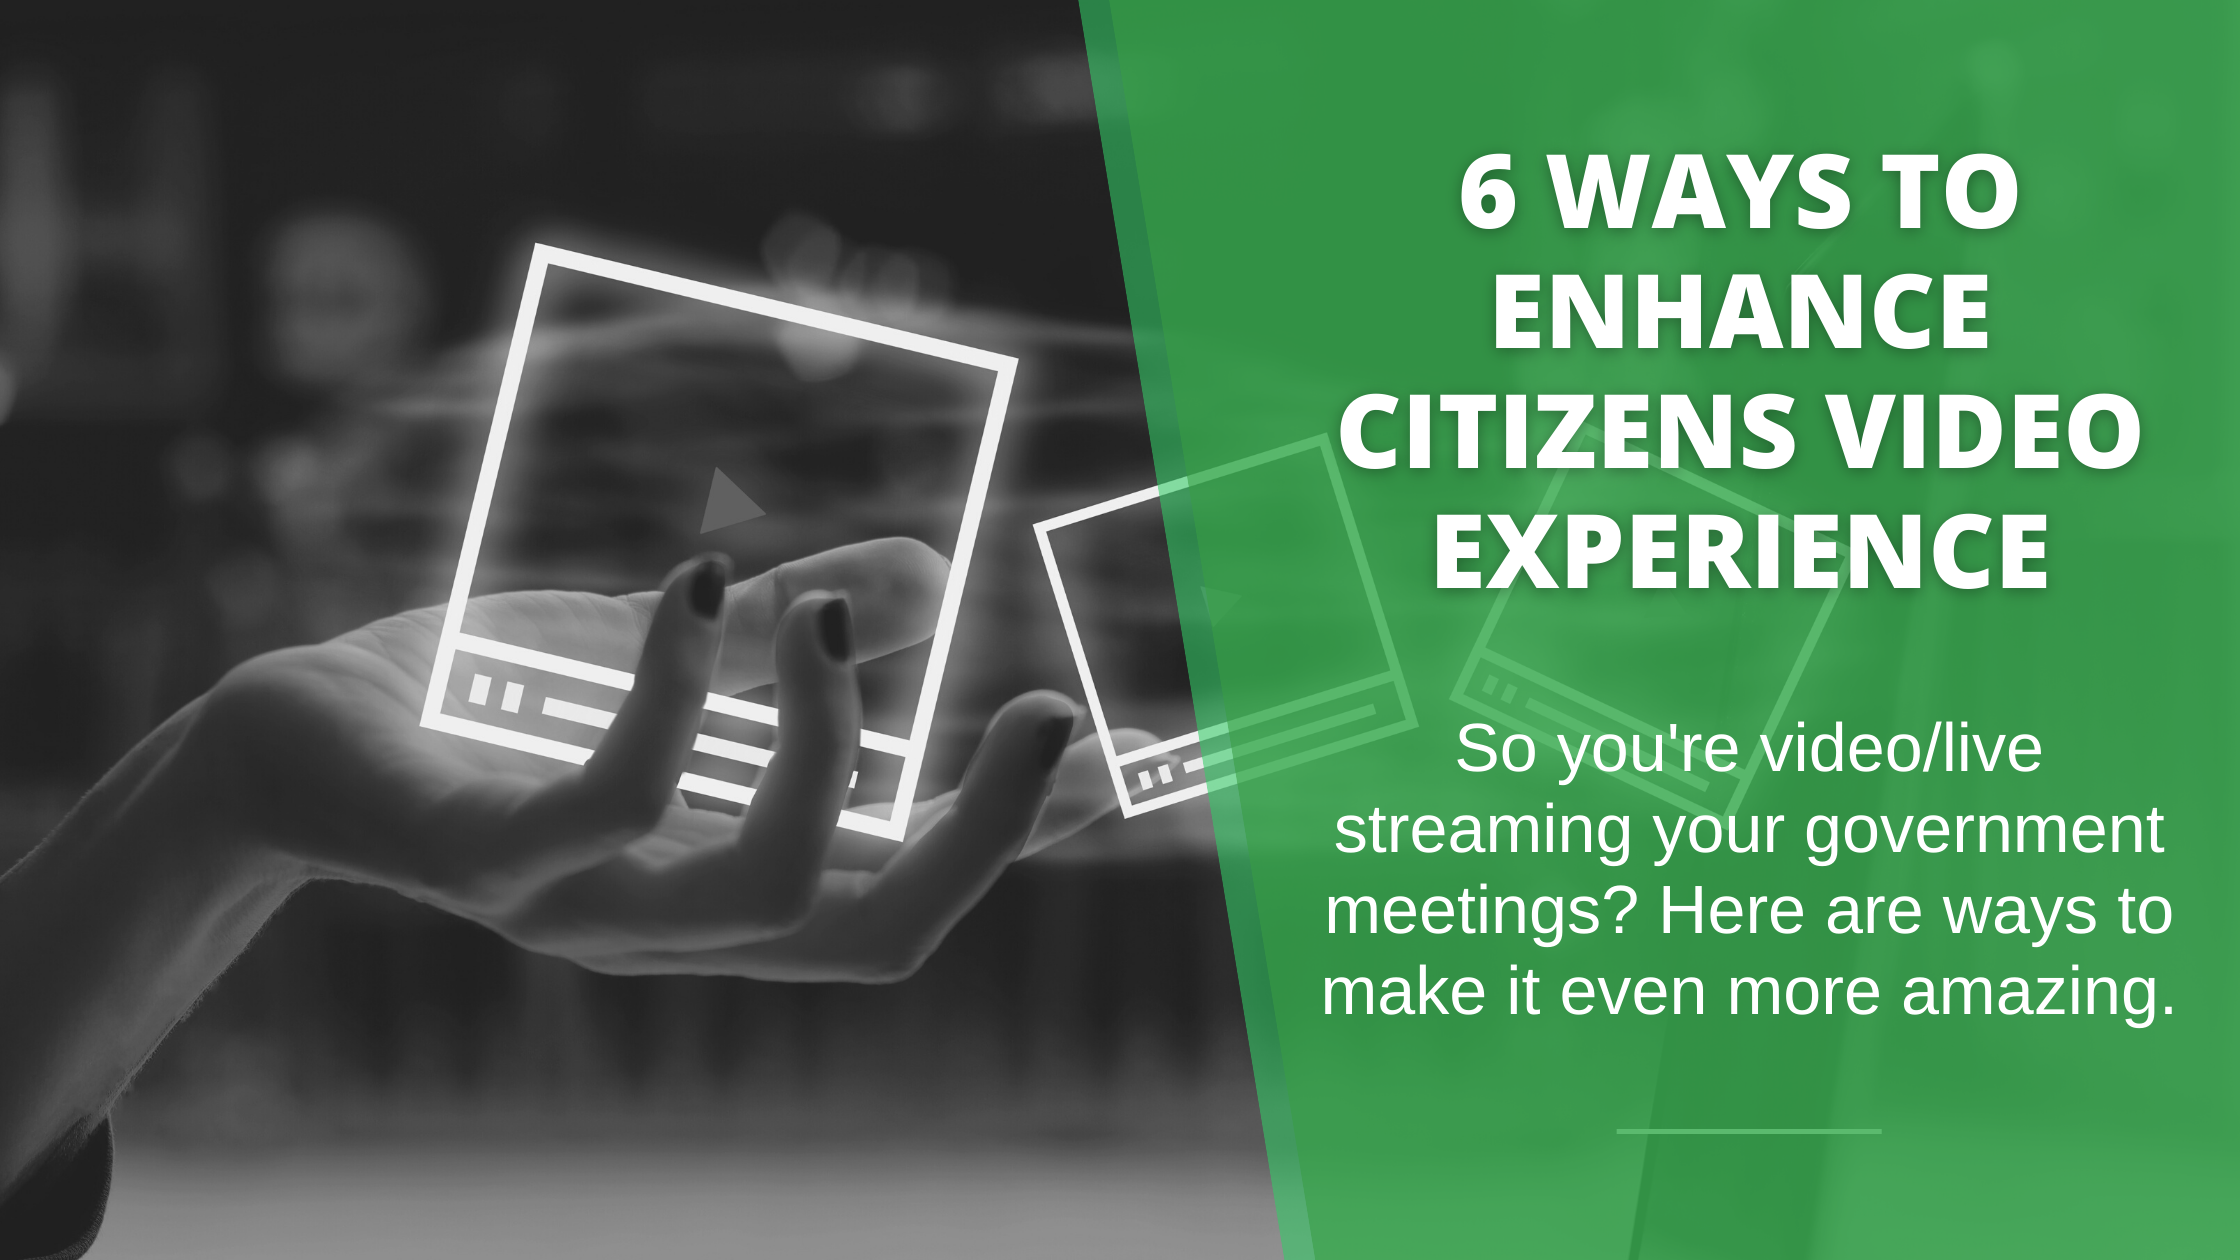 6 Ways to Enhance Citizens' Video Experience